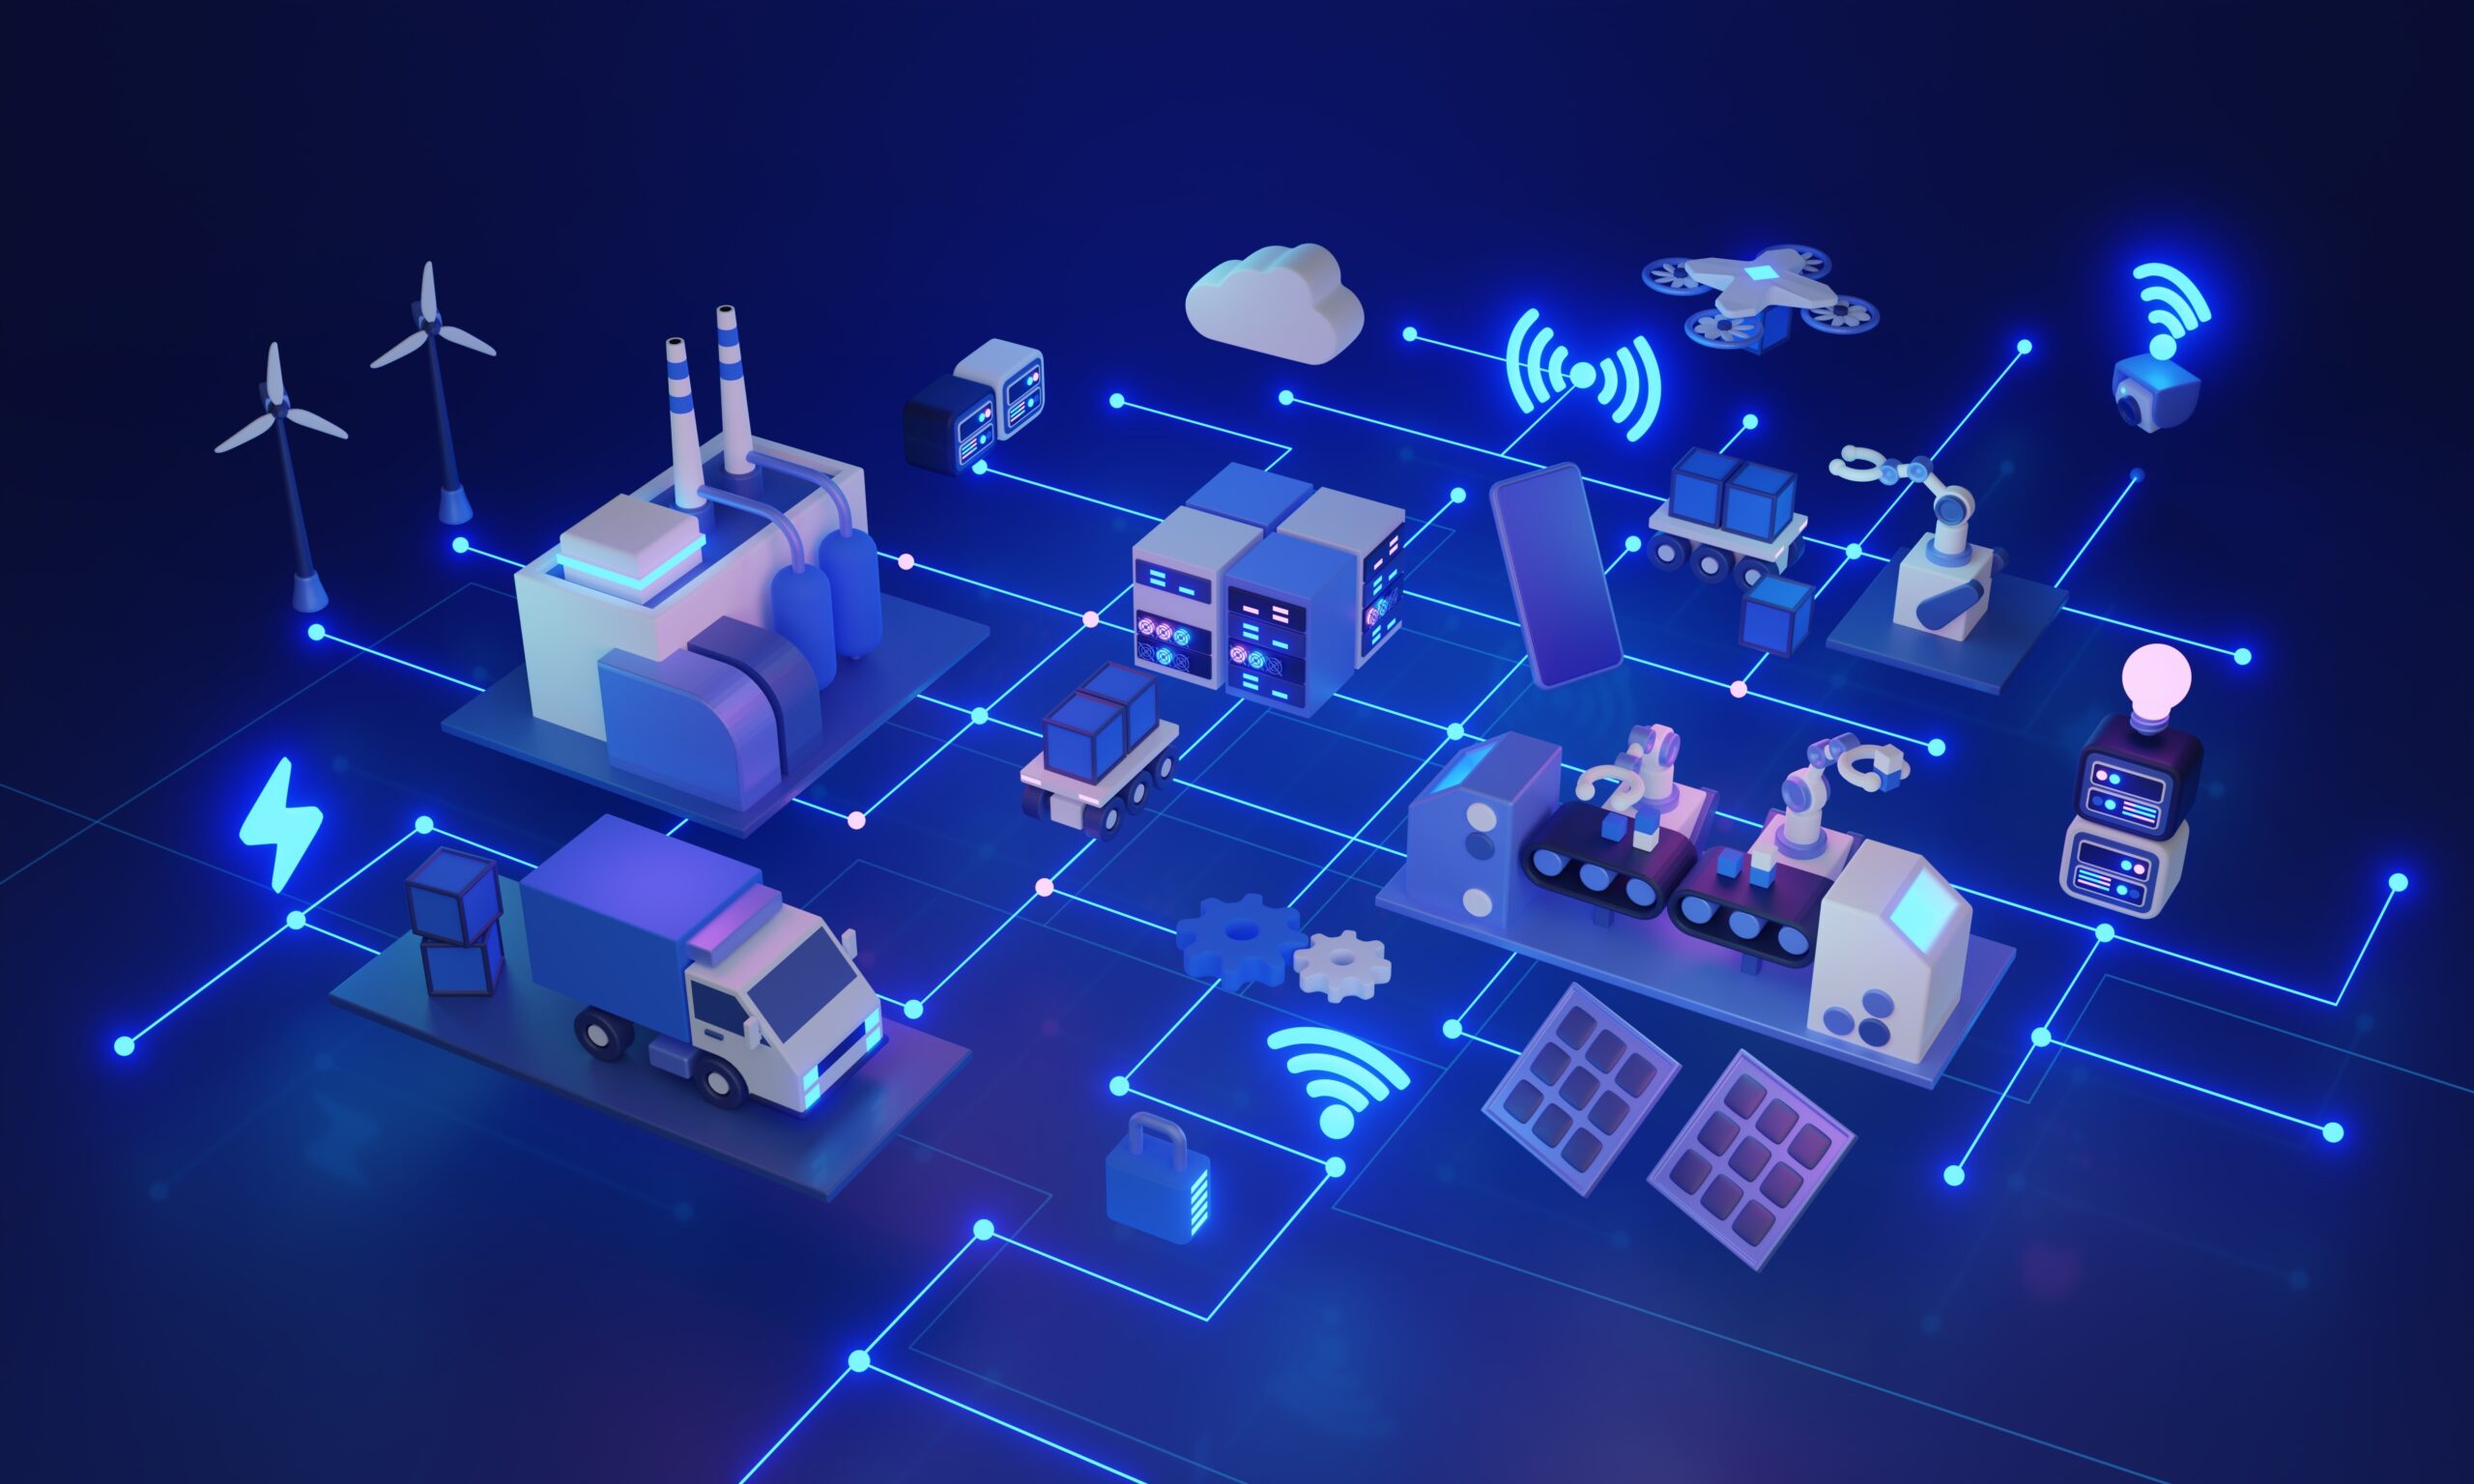 An isometric illustration of a smart industrial factory concept with interconnected nodes highlighting automation and technology features such as wireless communication, renewable energy sources like wind turbines, solar panels, electric truck, and a cloud computing interface.